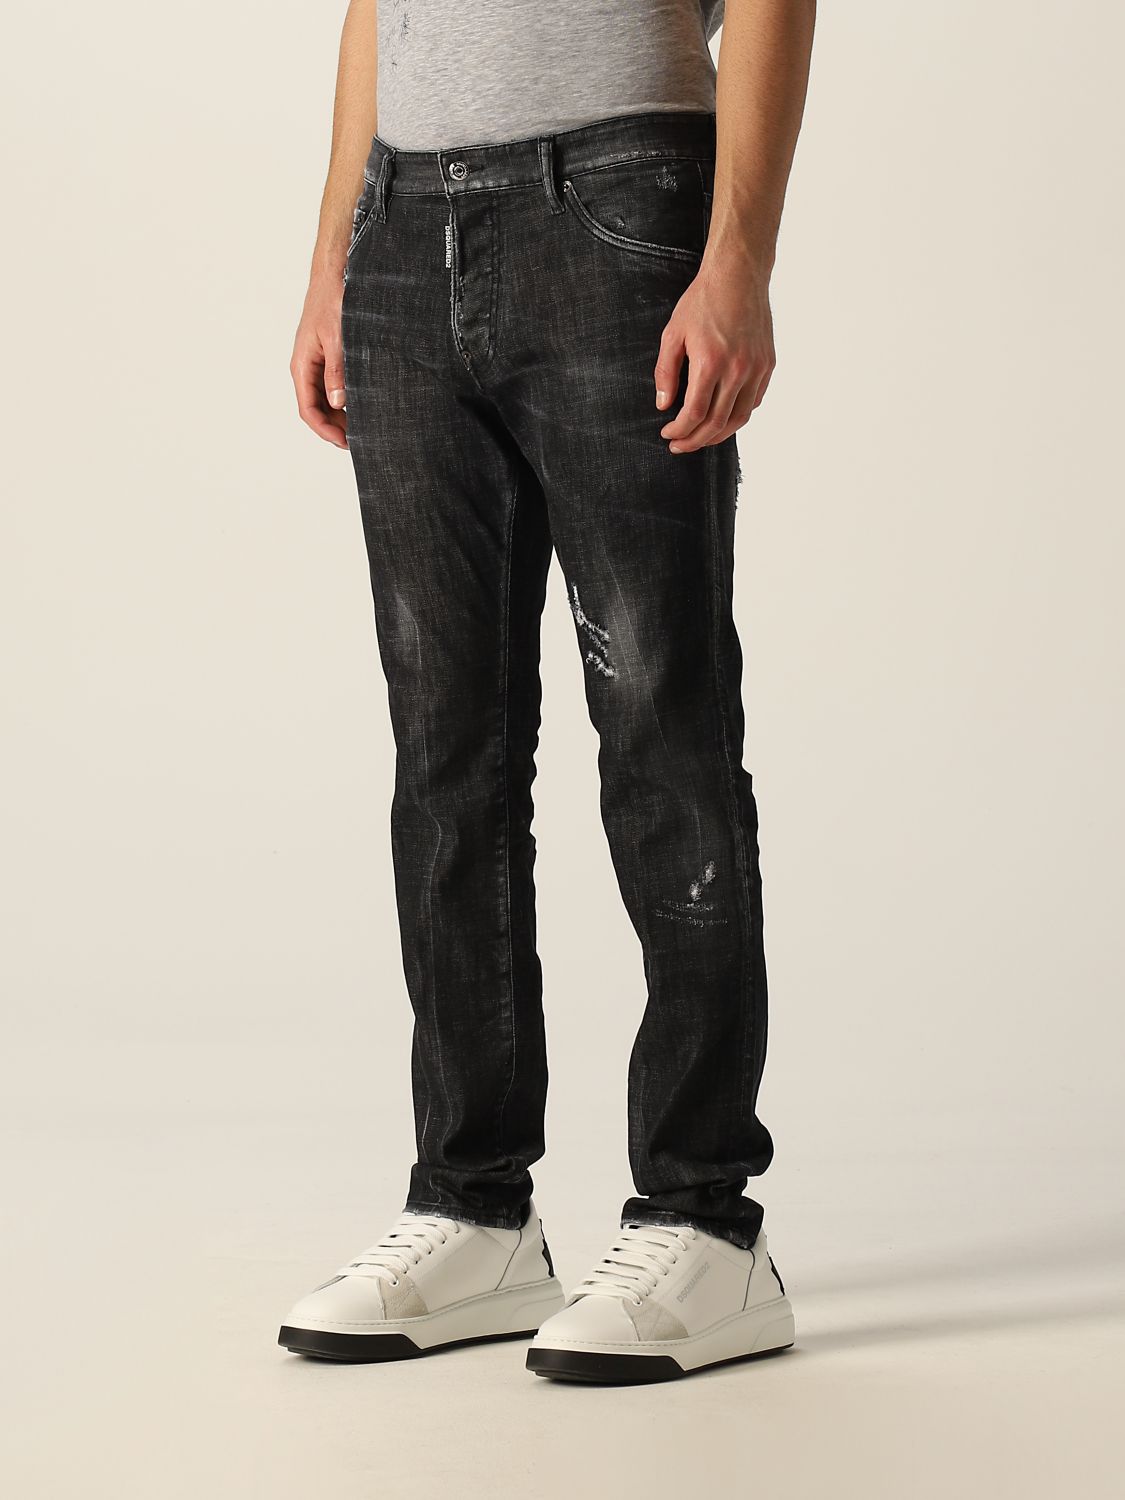 DSQUARED2: ripped jeans in washed denim - Grey | Dsquared2 jeans ...